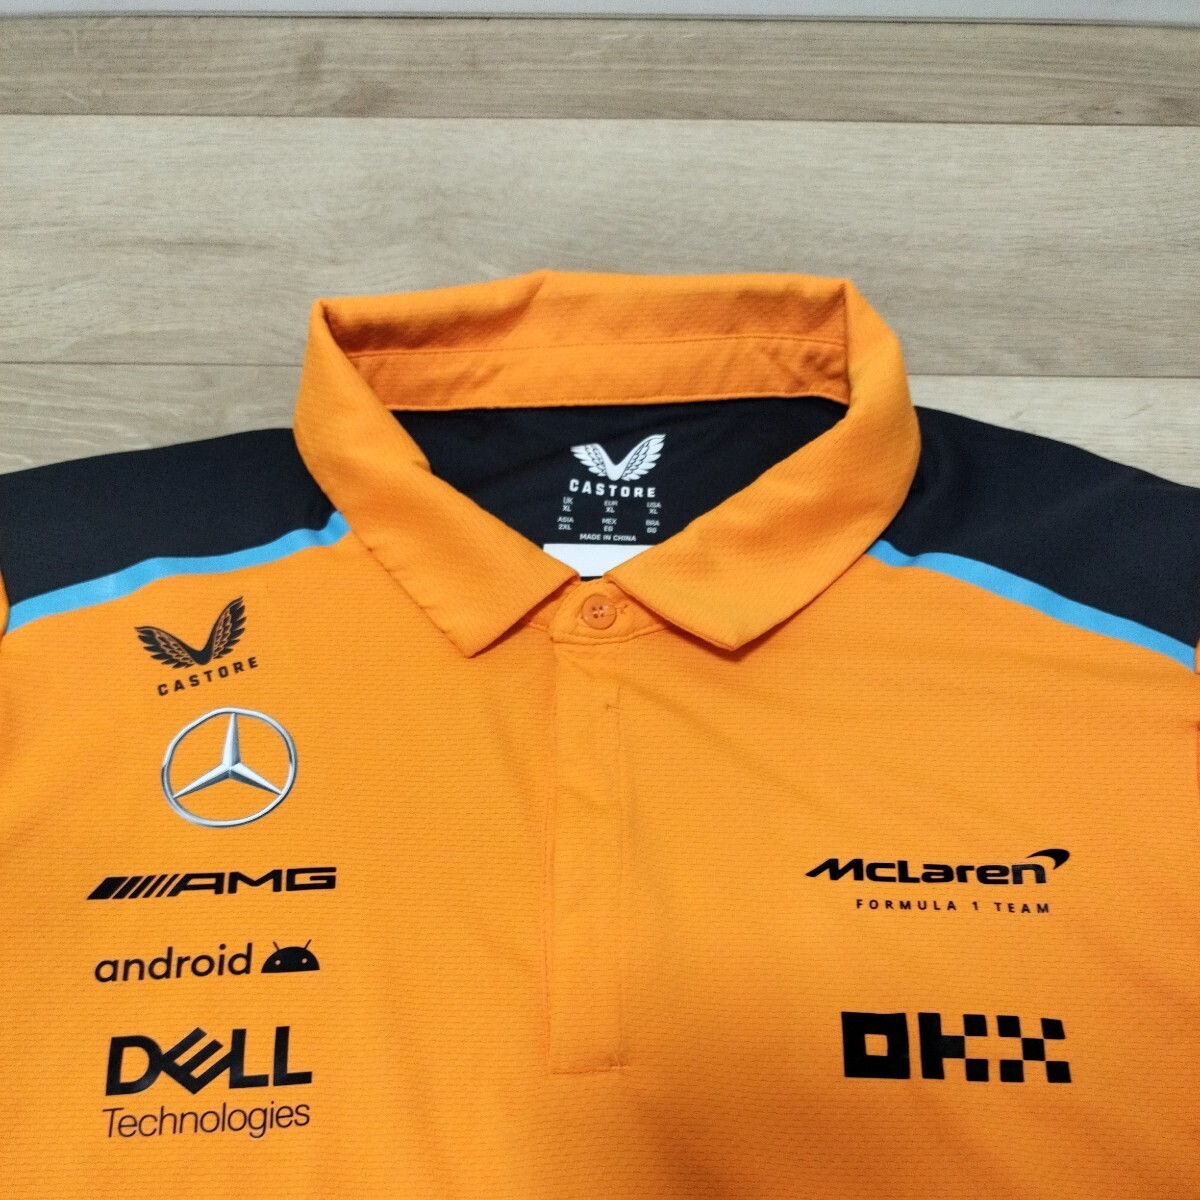 2023 year McLAREN F1 team supplied goods polo-shirt XL size Japan 2XL corresponding not for sale no squirrel earrings toli Japan GP CASTORE